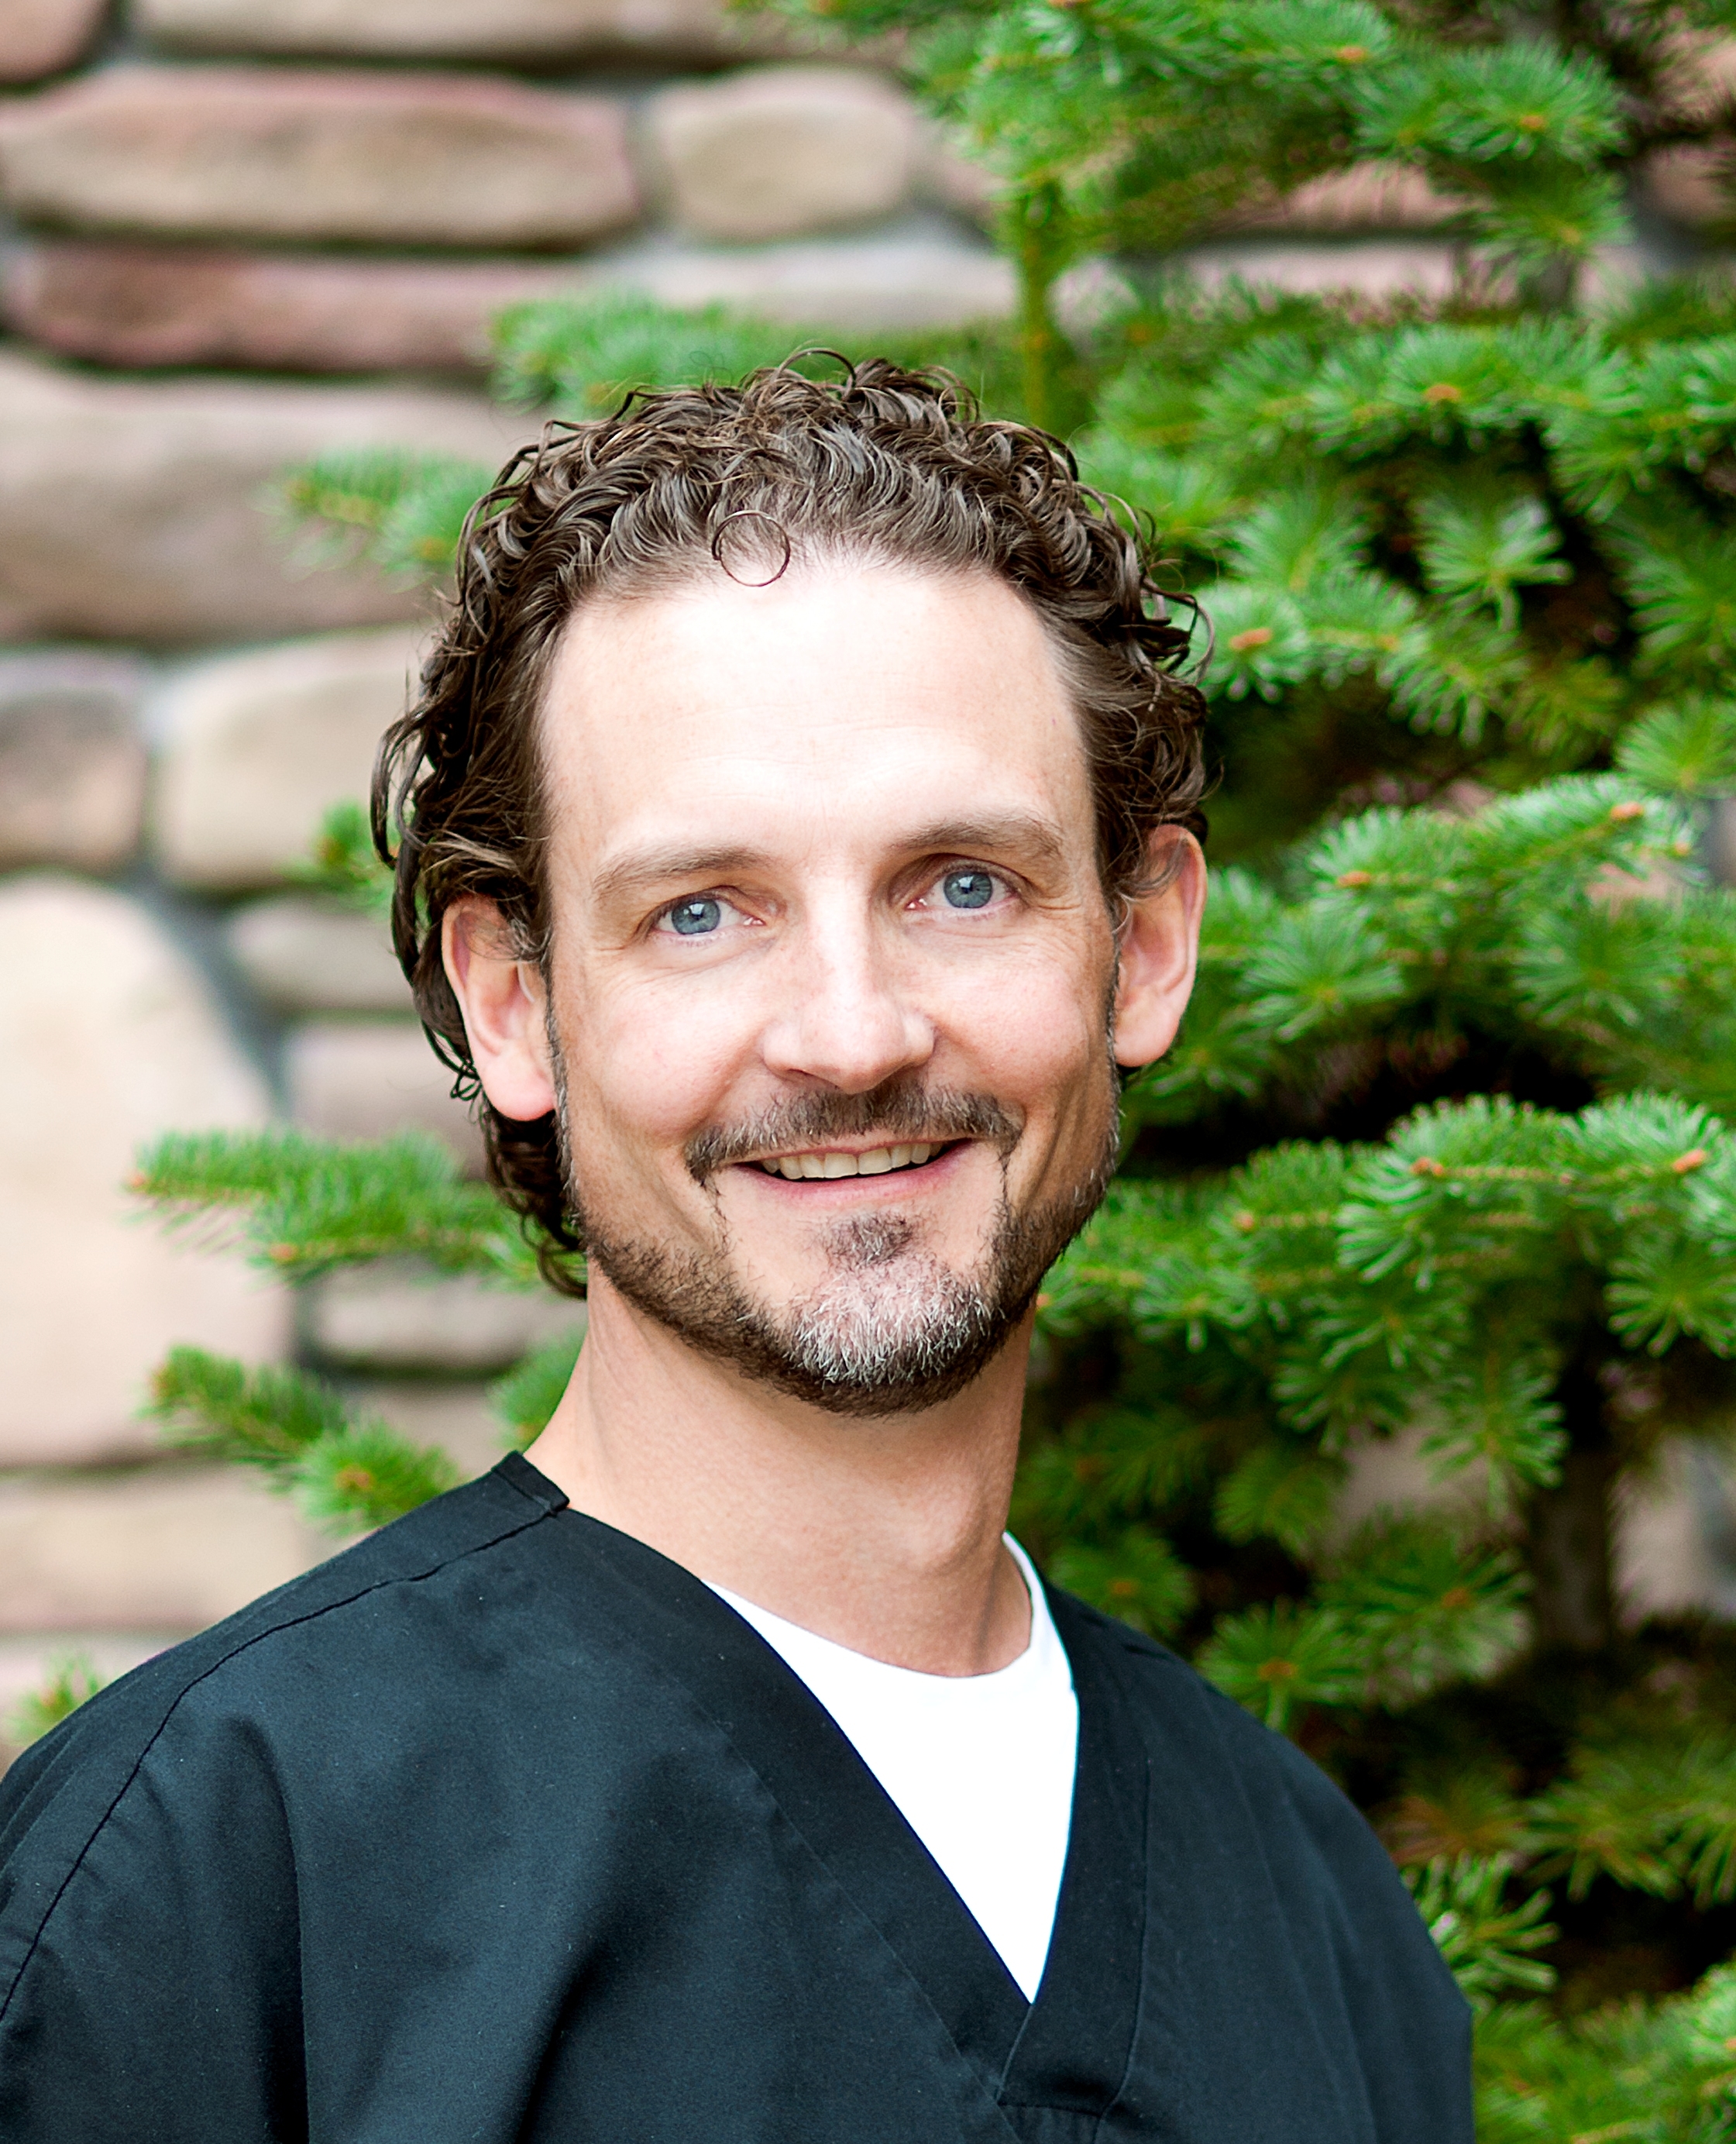 Salt Lake City Utah Cosmetic Surgery Dr. Richard Fryer has the highest Google and other reviews and specializes in breast augmentation, breast implants, breast reduction, and cosmetic surgery.